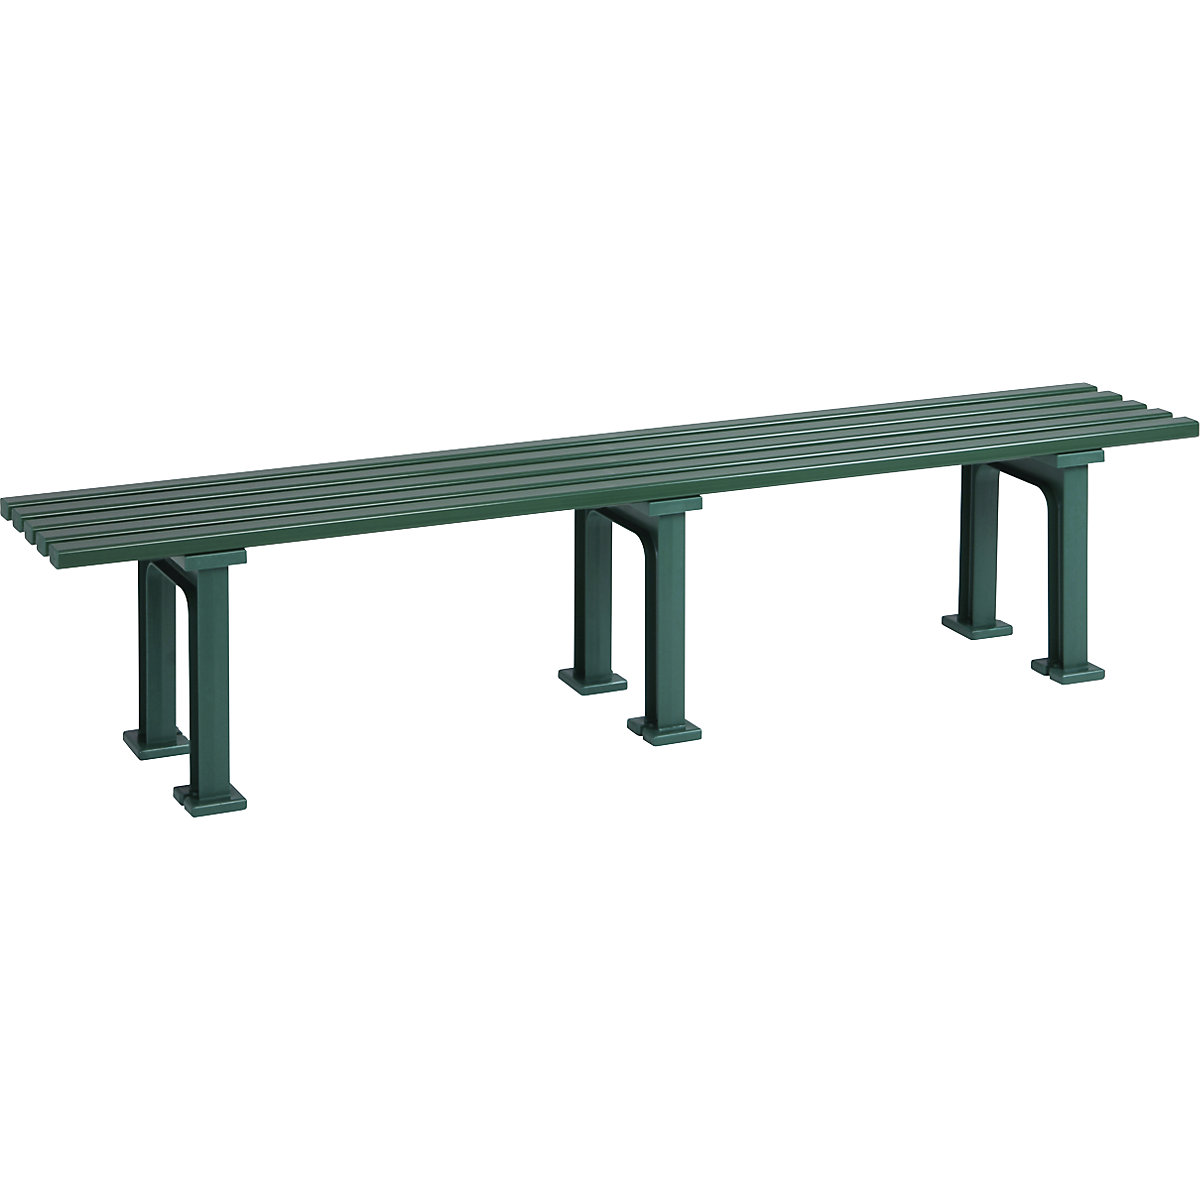 Seating bench without backrest, with 5 slats, length 2000 mm, green-7